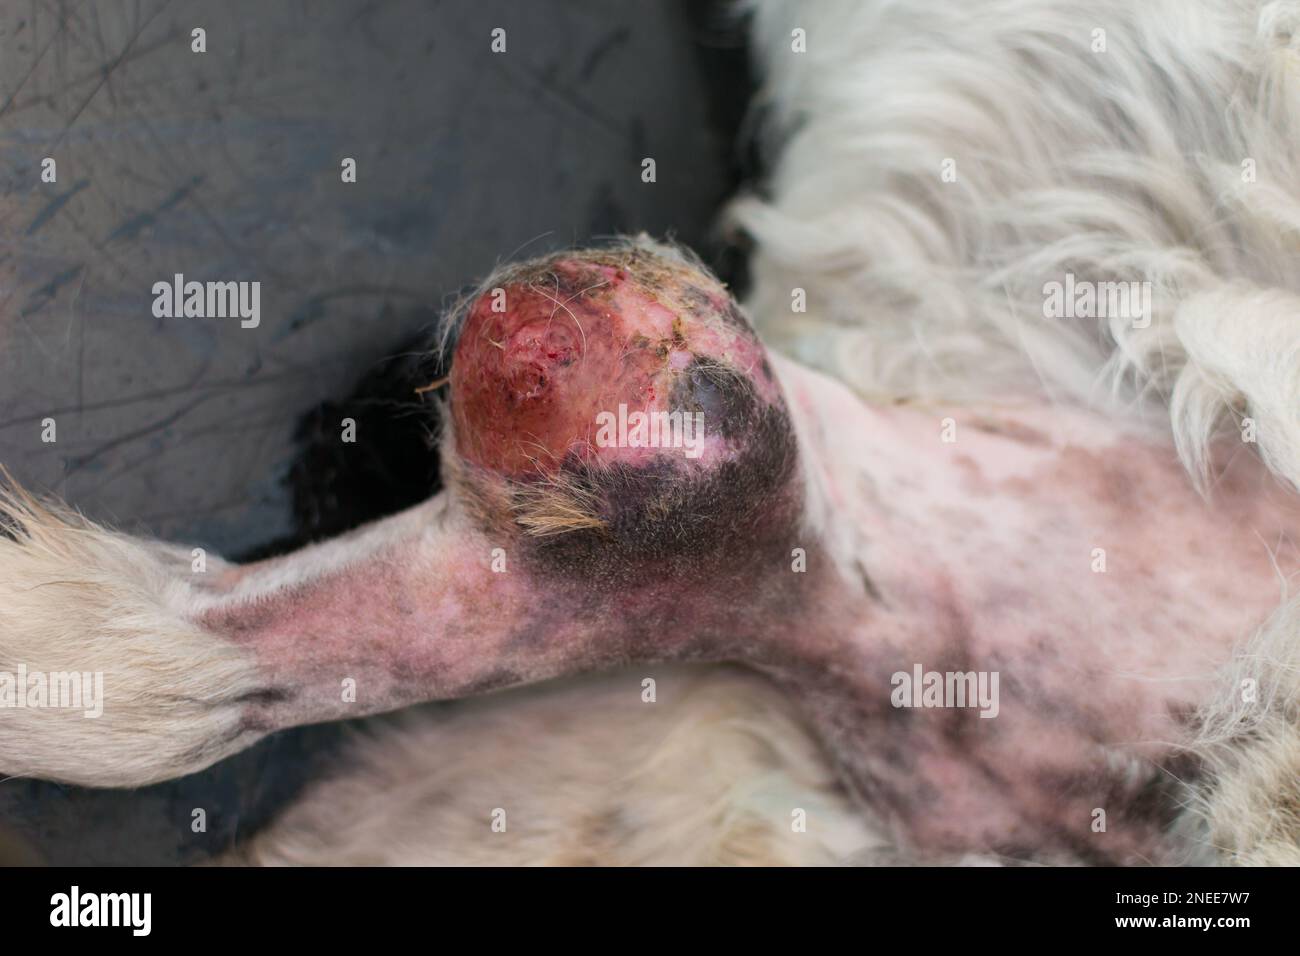 close-up photo of a dog with a big tumor on his leg Stock Photo